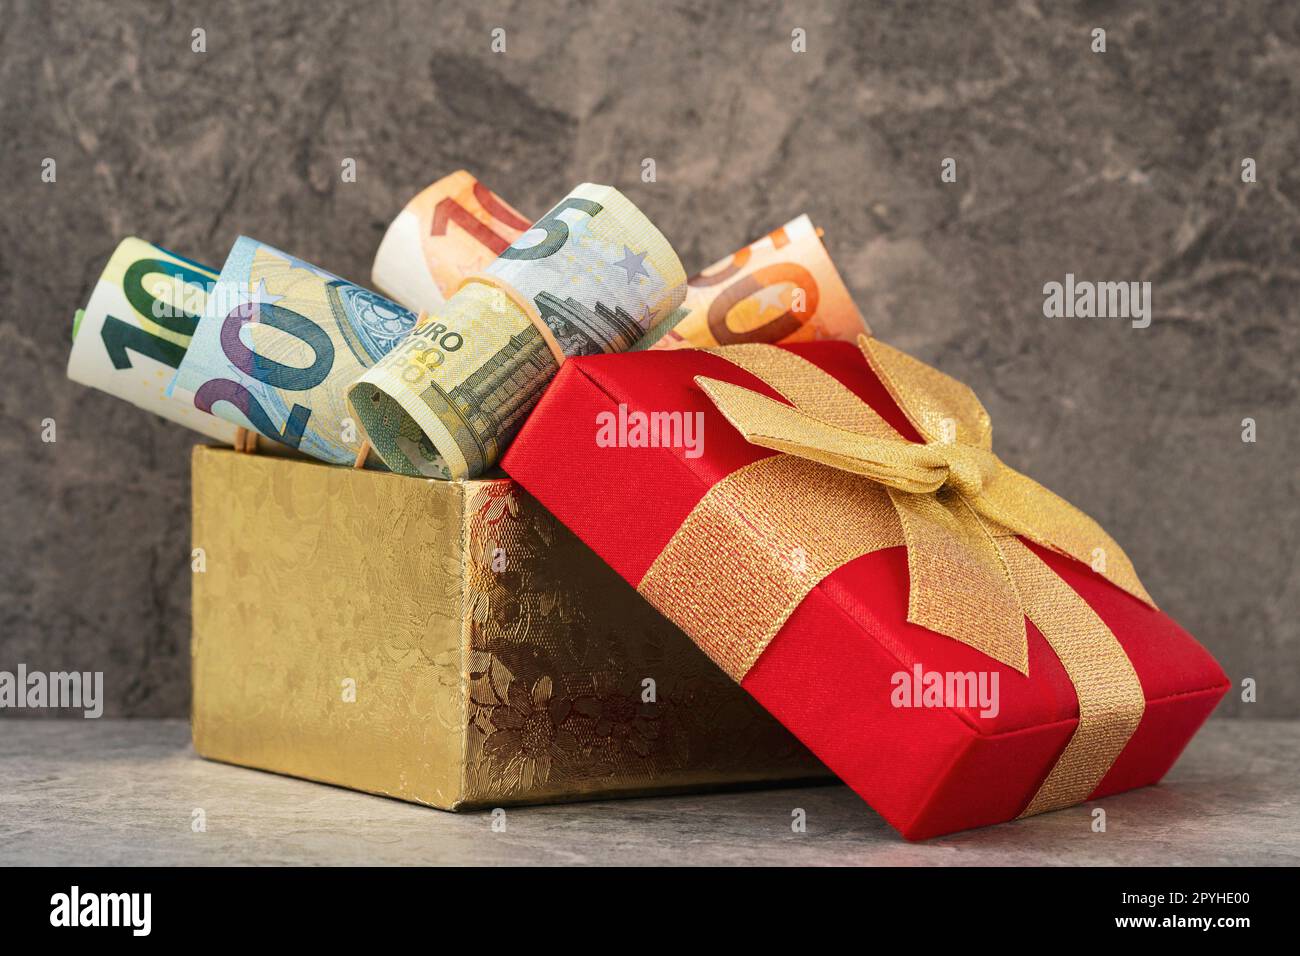 Pile of rolled up Euro banknotes in a present box Stock Photo